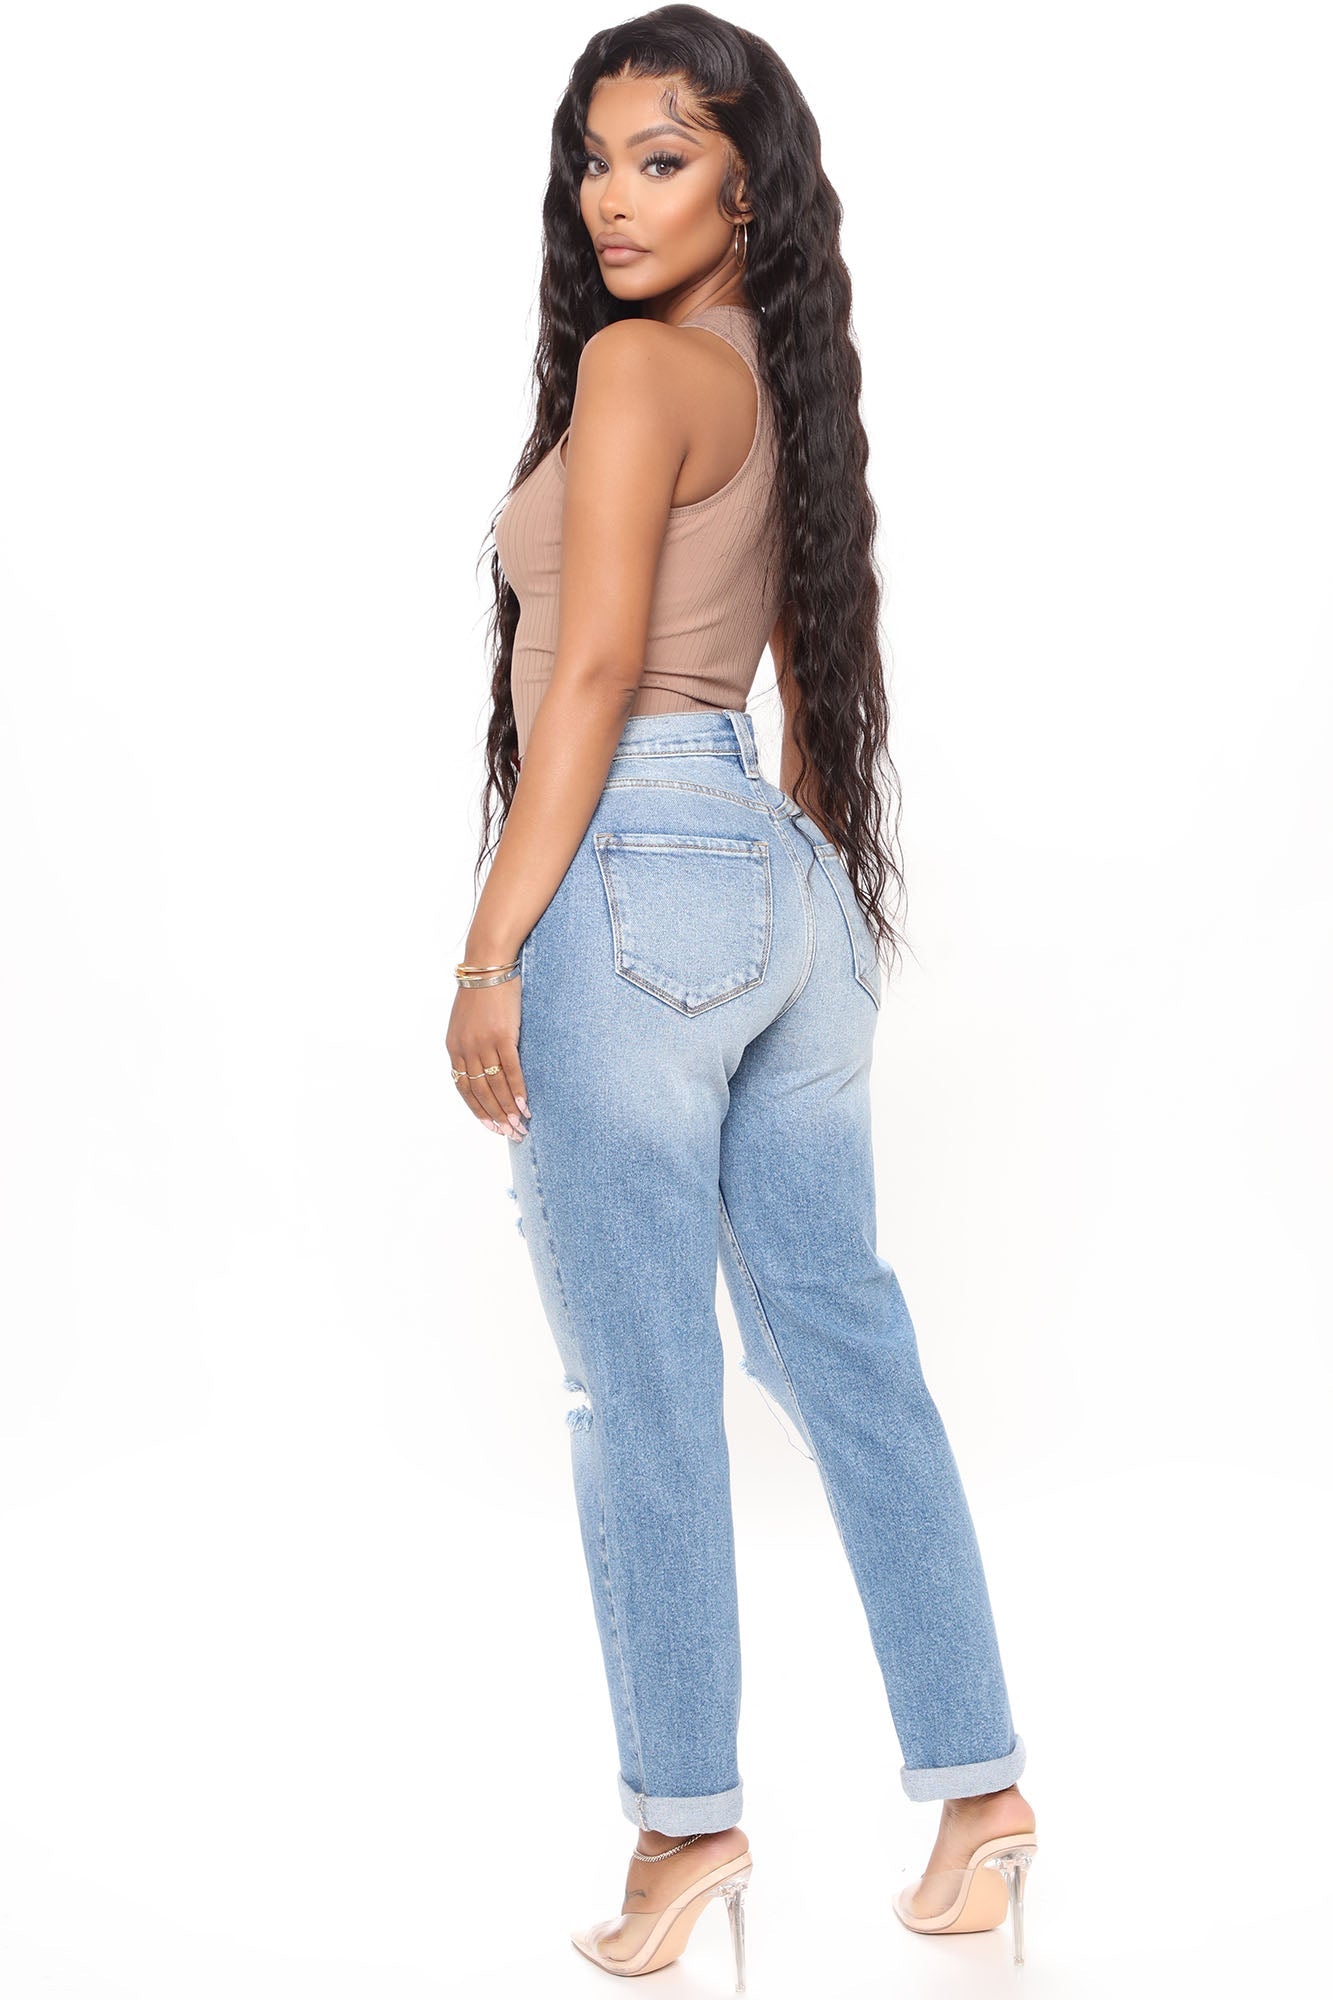 Classic Tapered Ripped Mom Jeans - Medium Blue Wash